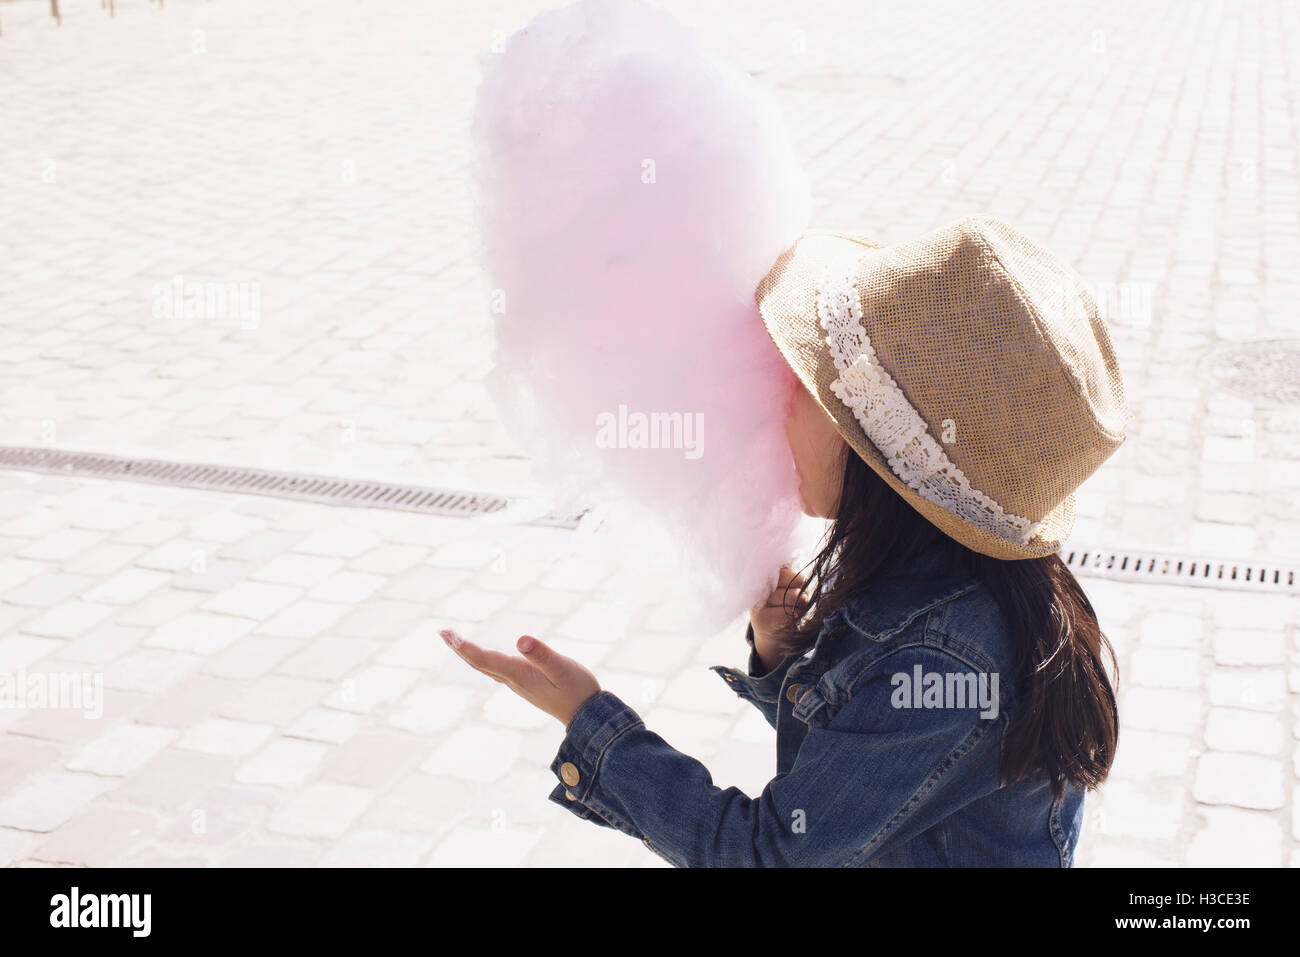 Girl eating cotton candy Stock Photo